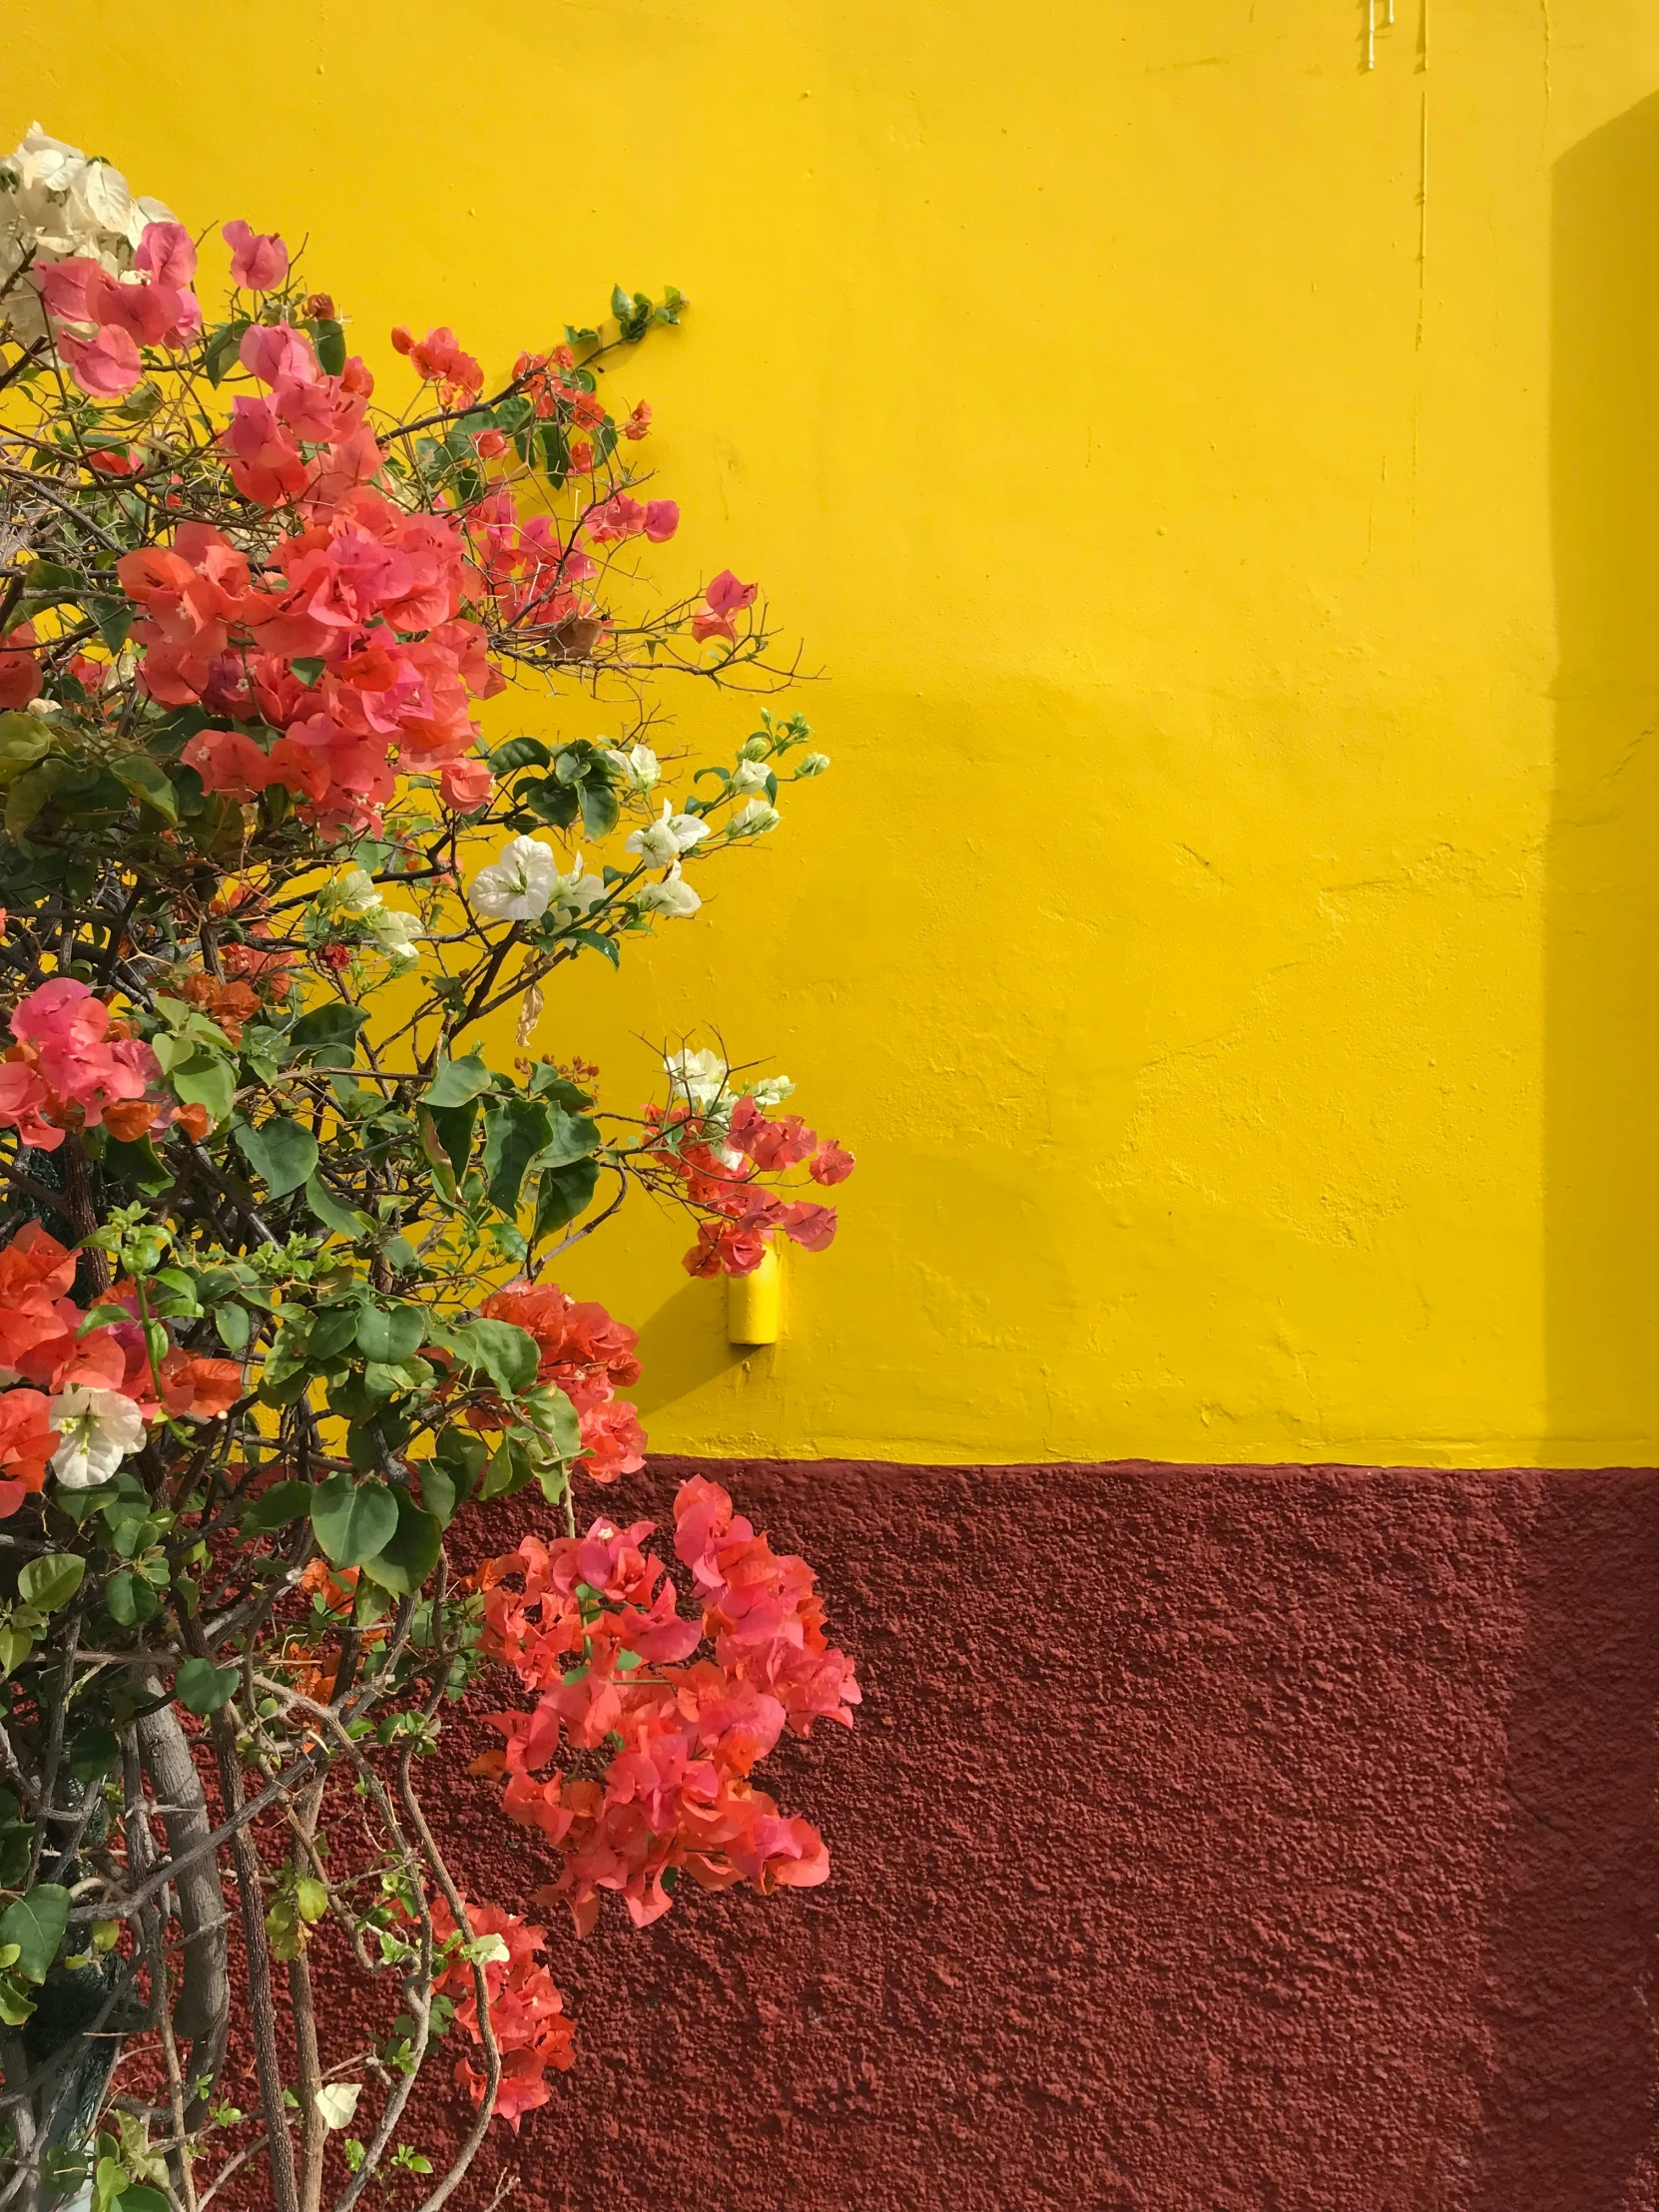 the flowered bush is next to a bright yellow wall